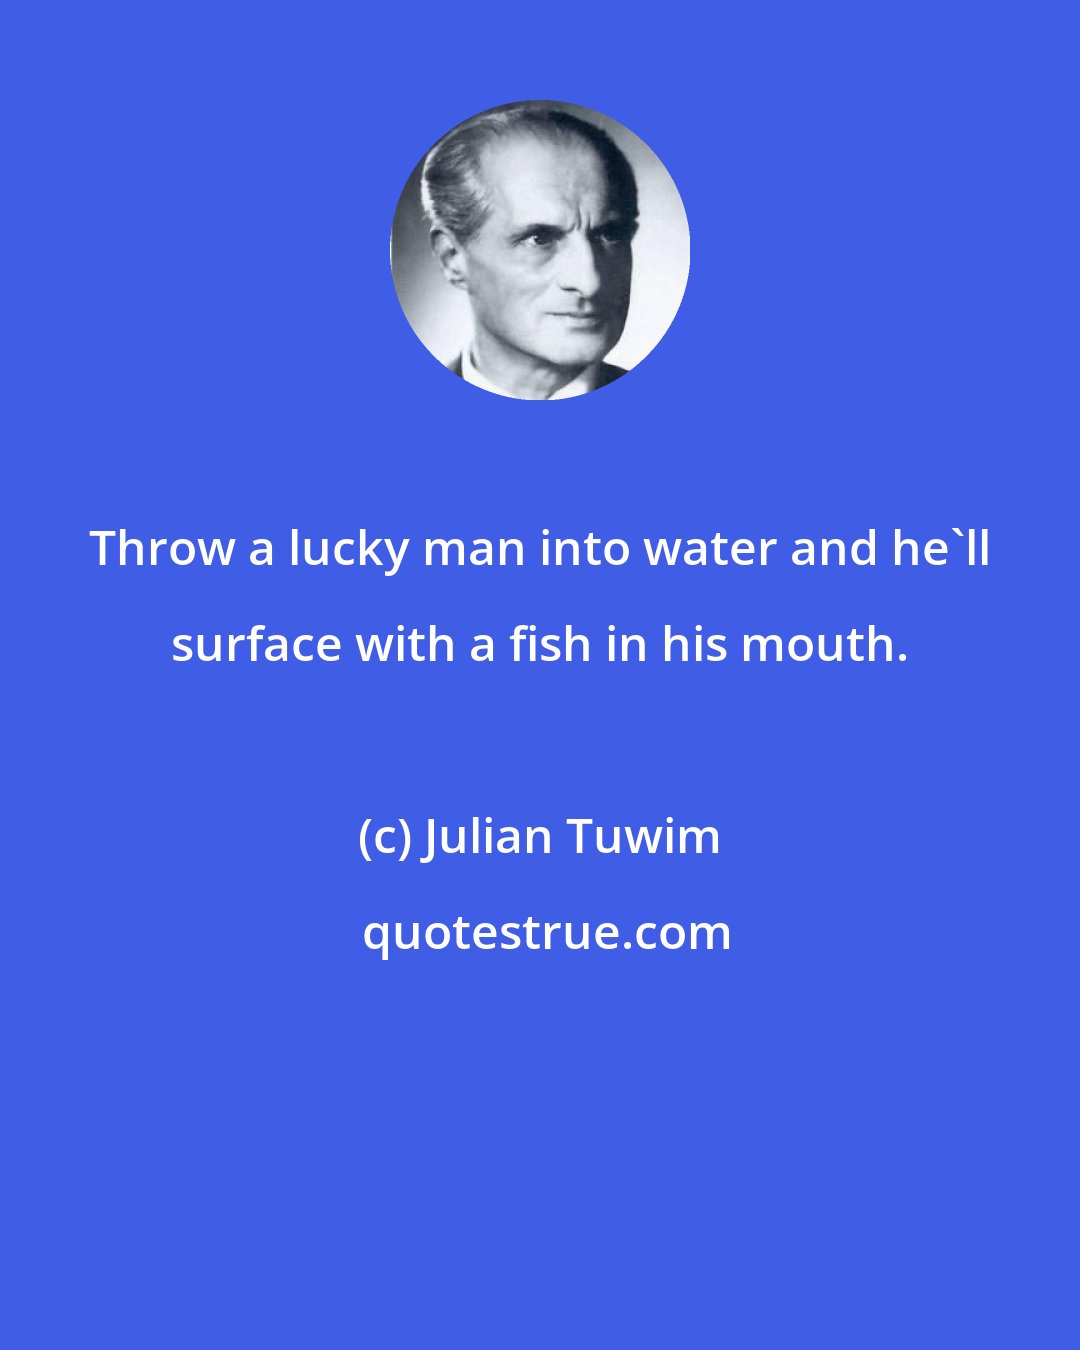 Julian Tuwim: Throw a lucky man into water and he'll surface with a fish in his mouth.